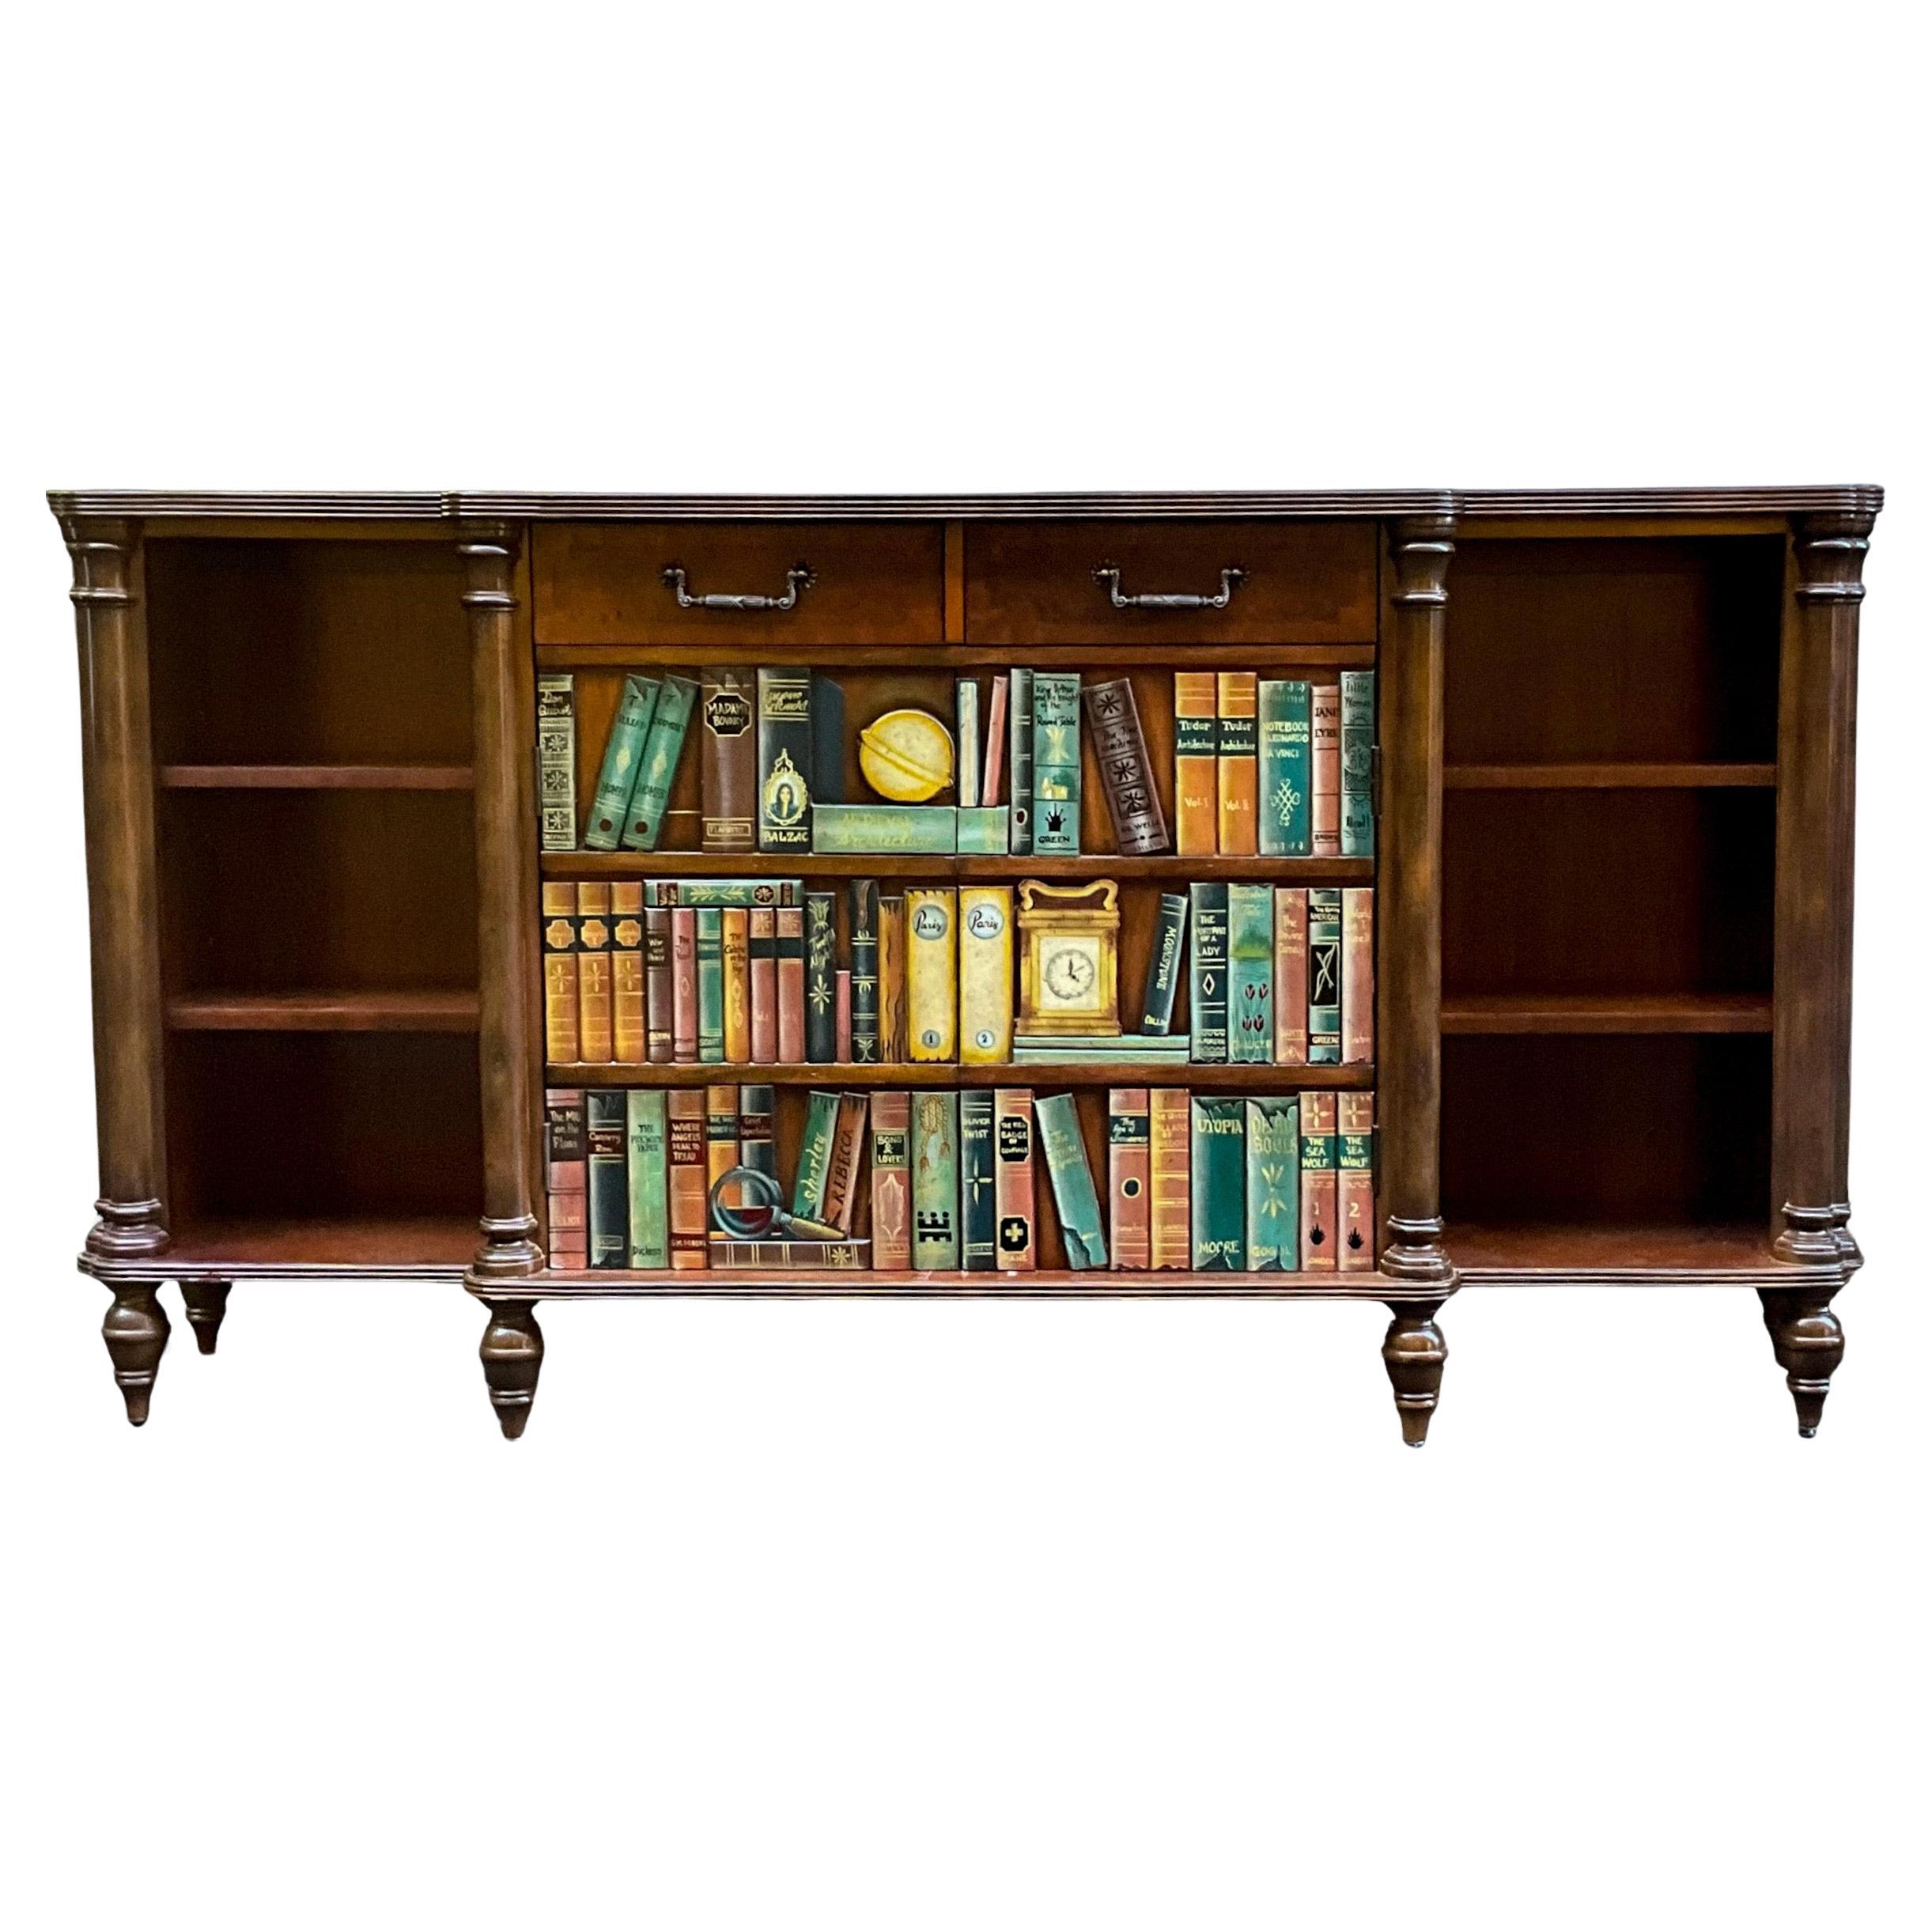 Maitland-Smith Book Form Leather Top Fruitwood Library Cabinet / Credenza 